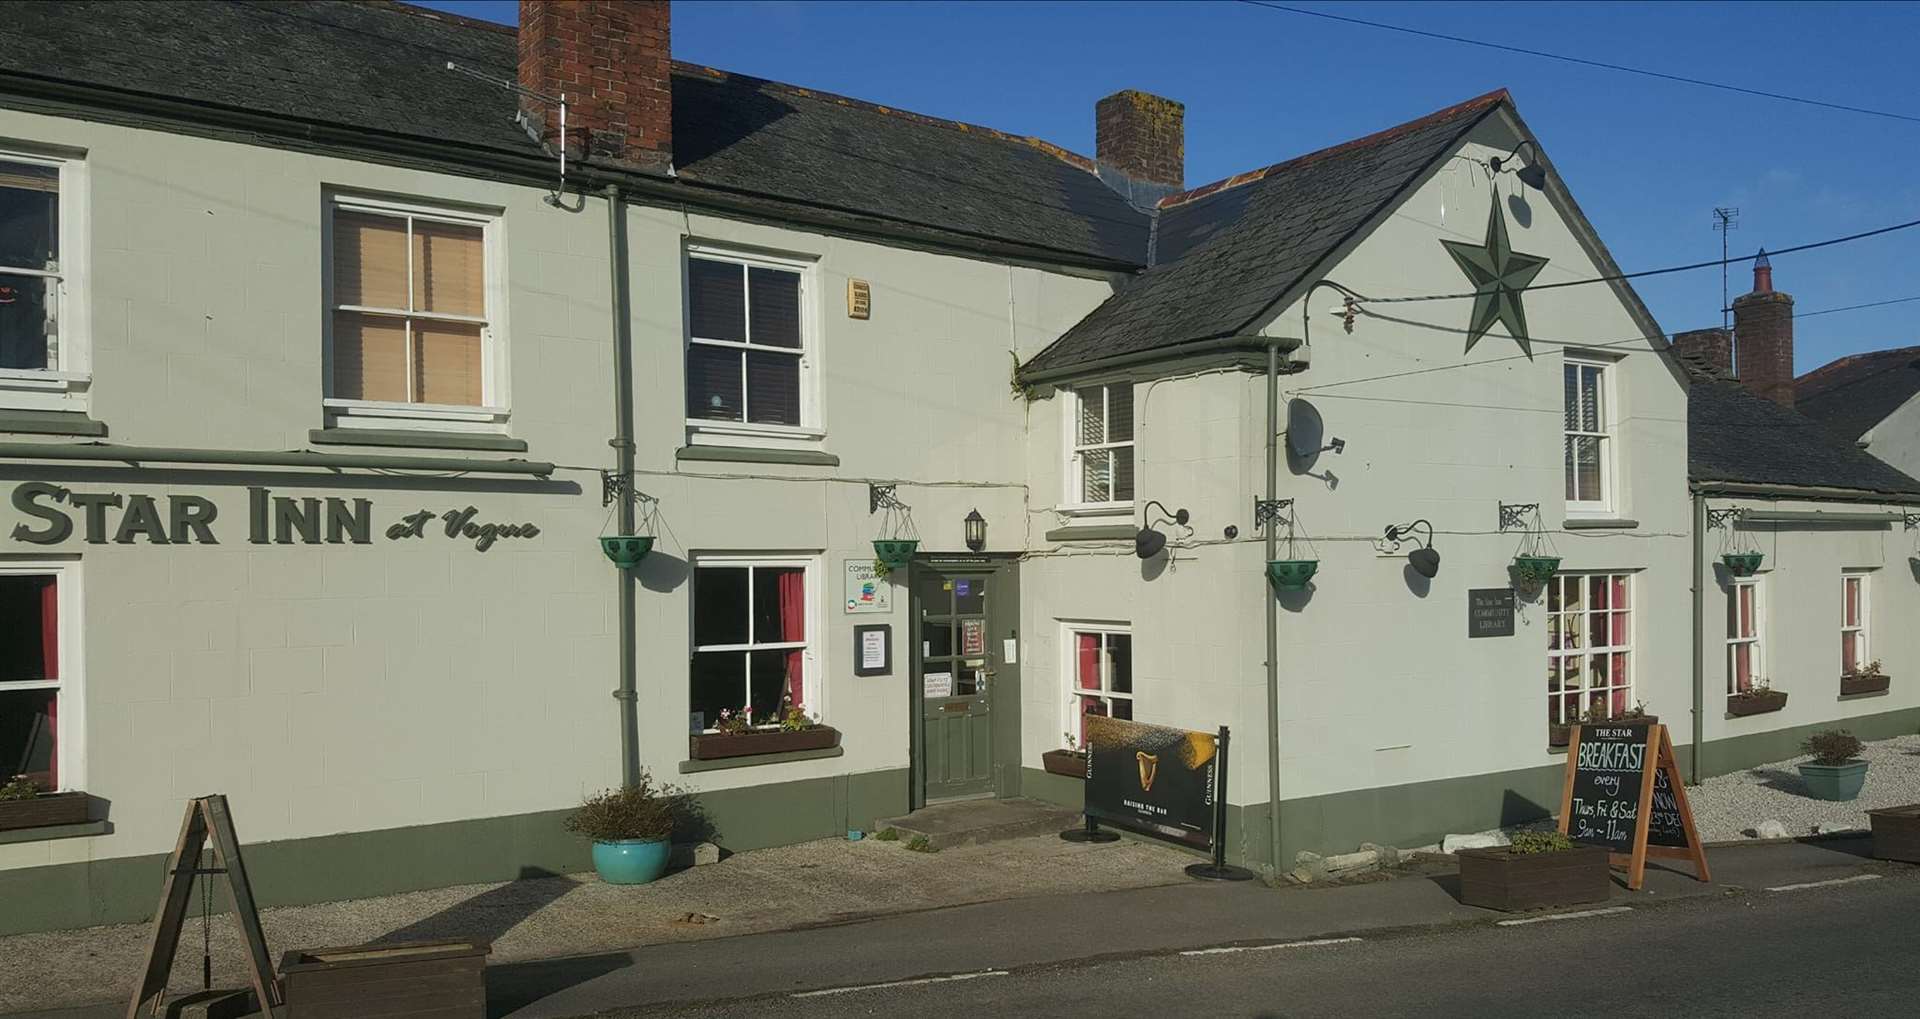 The Star Inn At Vogue is around two miles from Redruth (The Star Inn At Vogue)